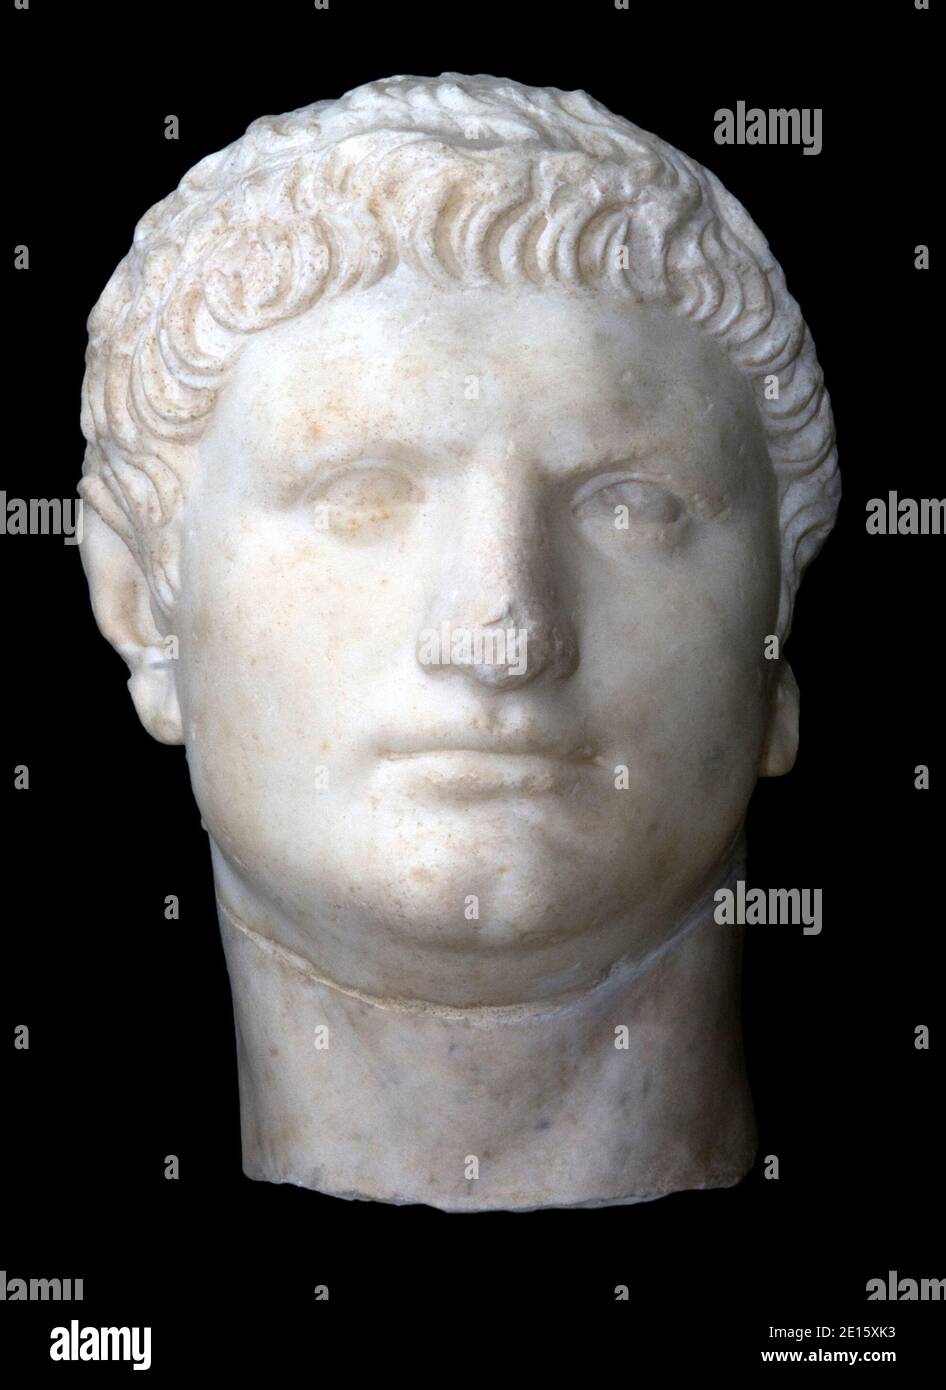 Portrait of Nero presented at the exhibit 'Nerone', examining the life and dark legends of Emperor Nero (37-68 AD), which opens in Rome ,Italy on April 12, 2011 across five different landmarks of the ancient imperial capital. Nero has been infamous throughout history for tyranny, extravagance, cold-blooded murder, and cruel persecution of Christians. Ancient Roman historians accused him of killing his mother, stepbrother and two wives, and of burning Christians at night in his garden for firelight. He was known as the emperor 'who fiddled while Rome burned', although fiddles weren?t invented f Stock Photo